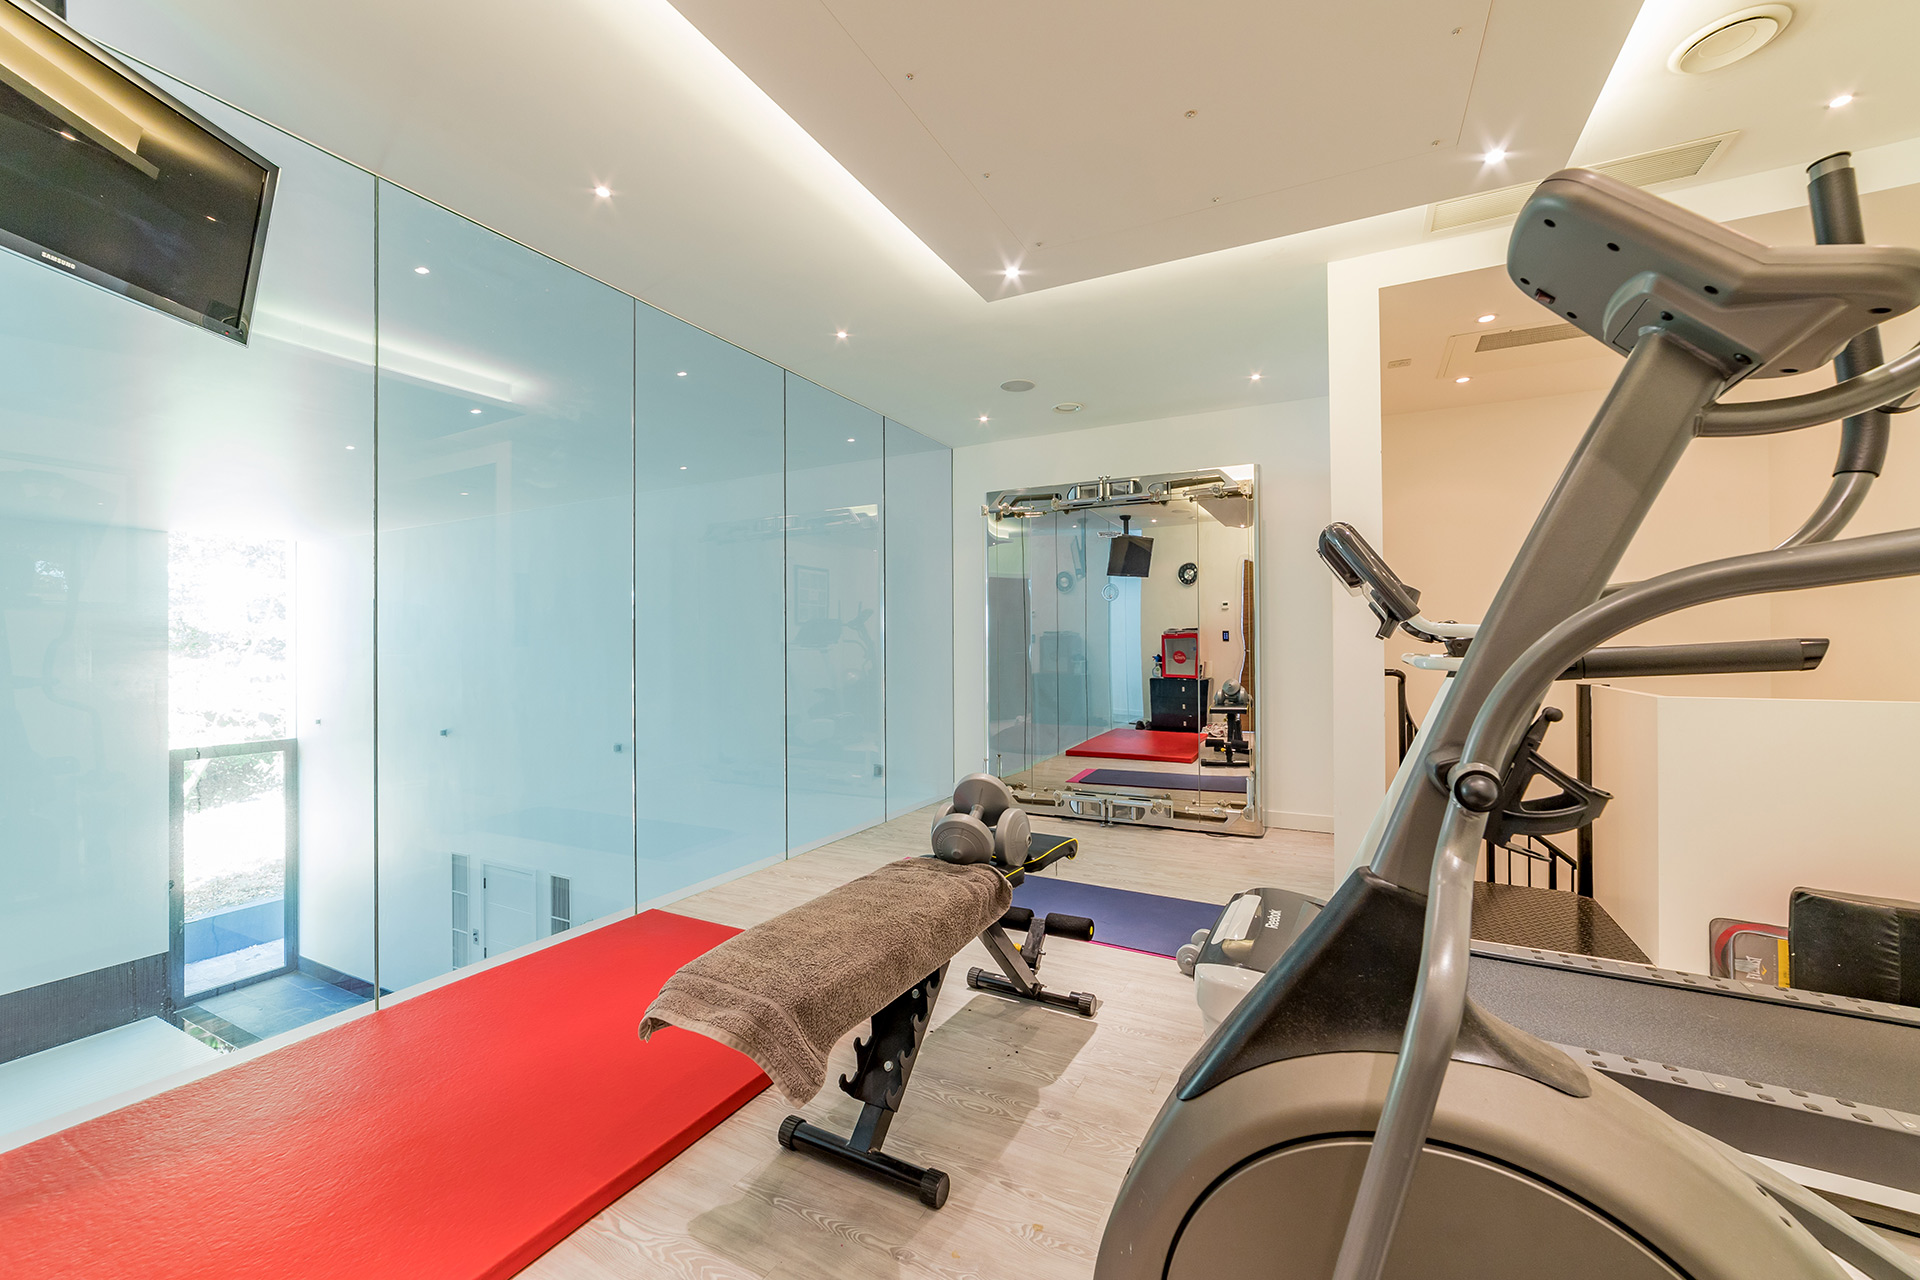 gym area overlooking swimming pool with glass paneling